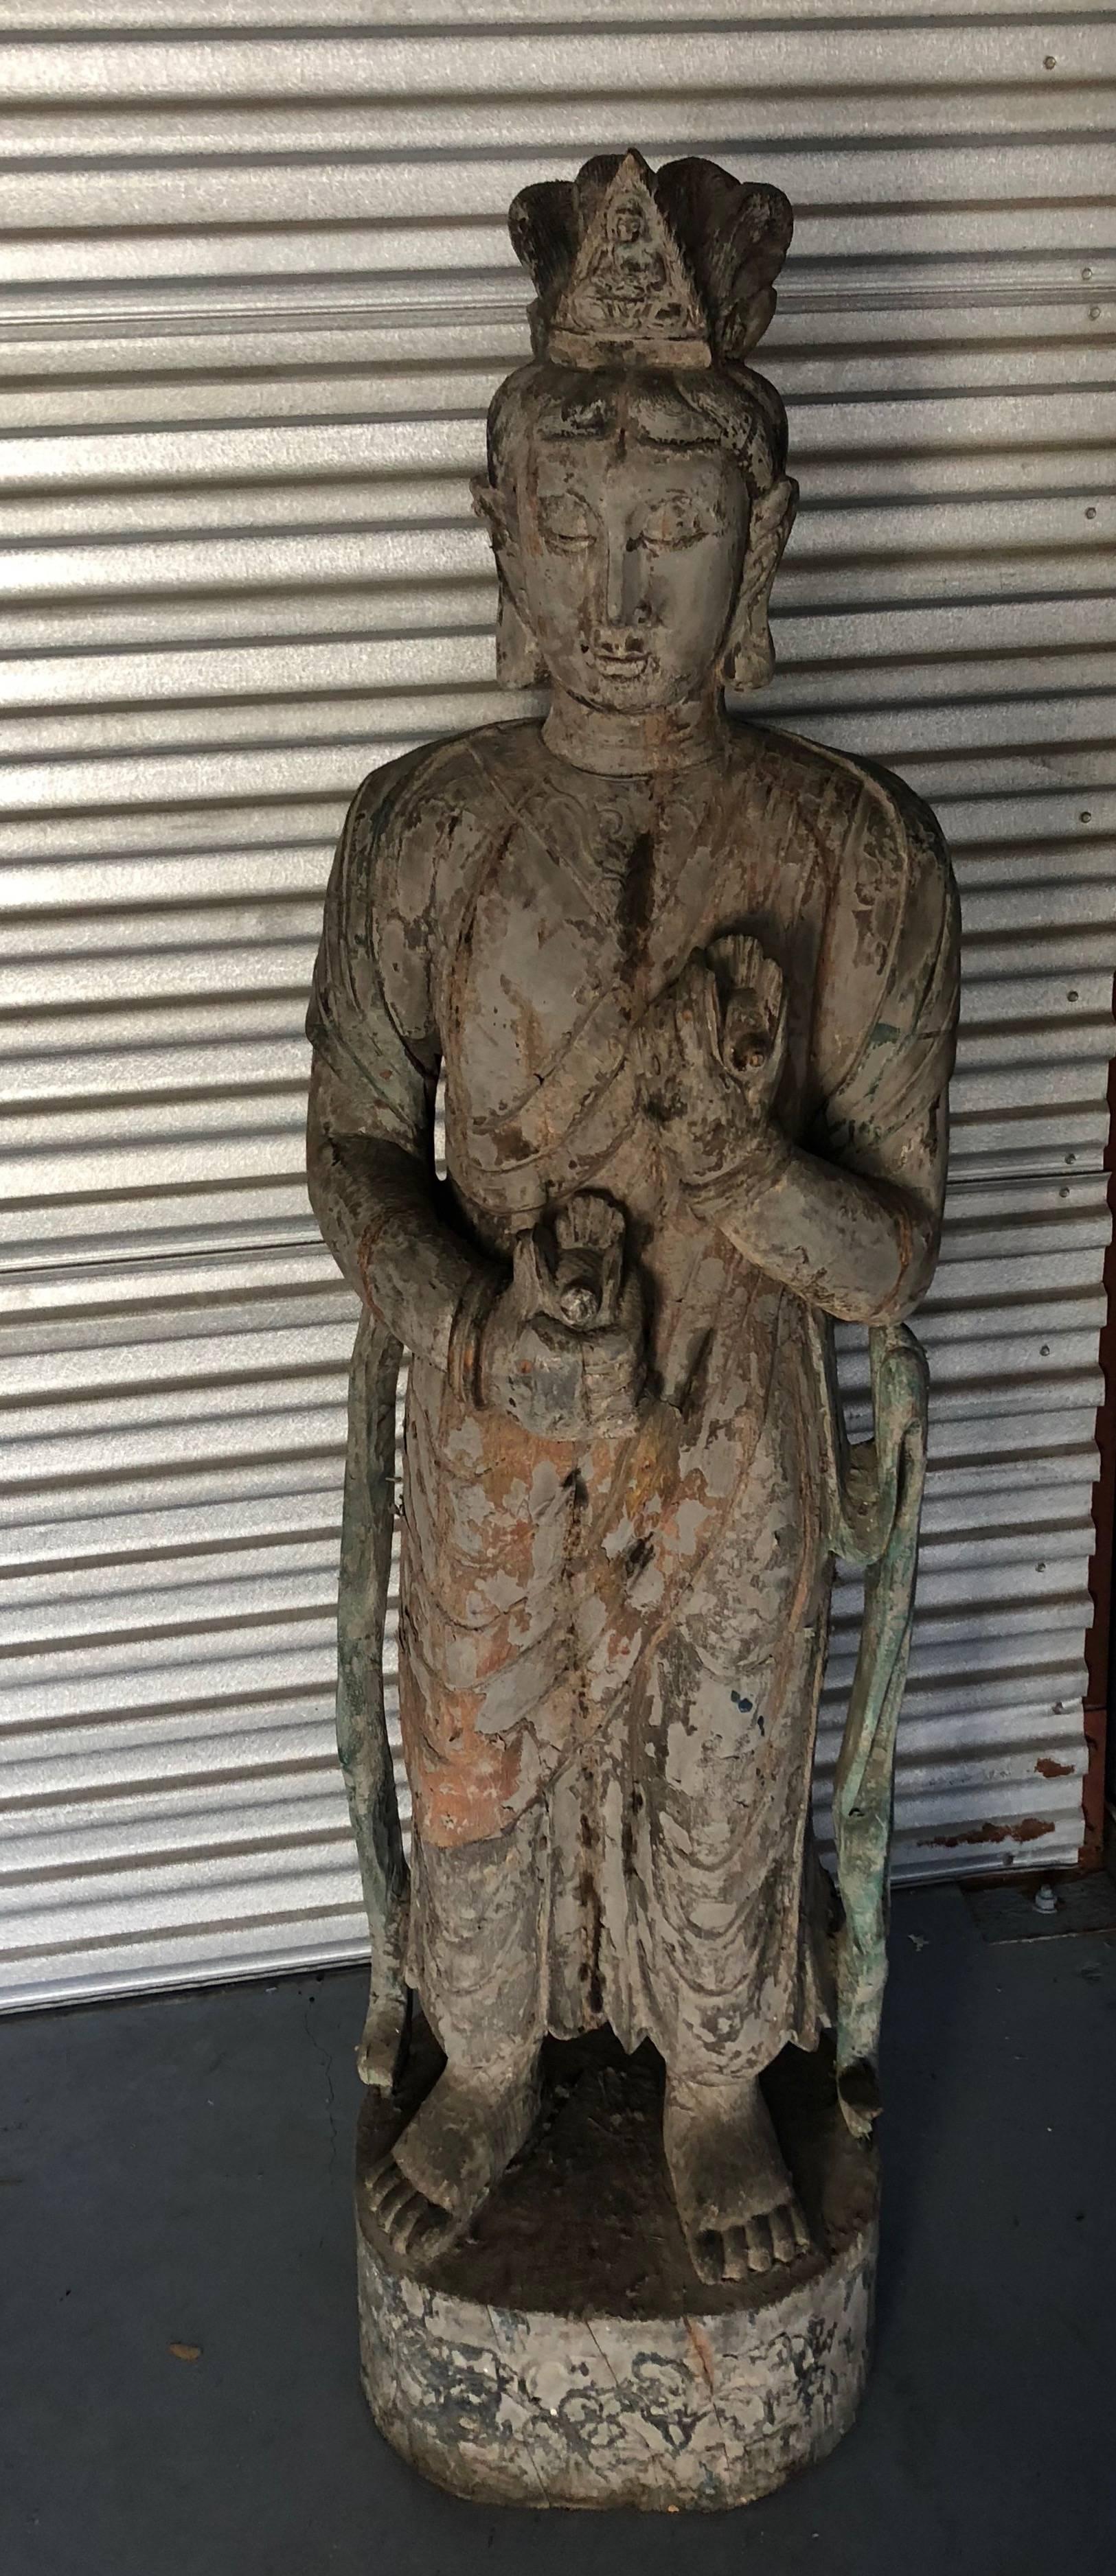 This Ming dynasty style Guan Yin statue is hand-carved, wooden and has been finished with a green lacquer Please see the enclosed certificate I received from the Veng Son Art Craft Company 10/12/02. She has birds in hand and ribbons flowing from her